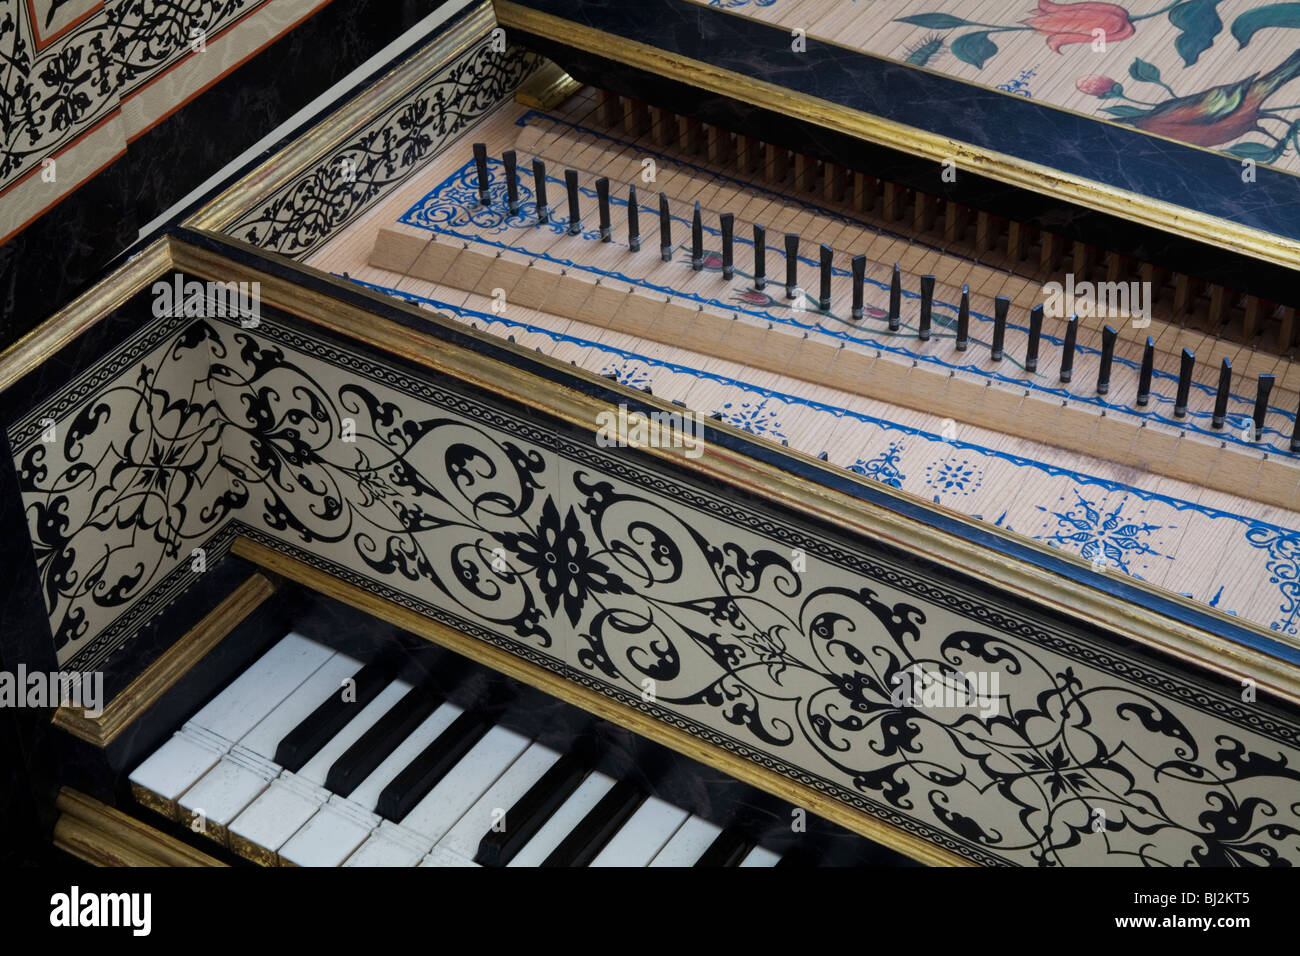 Musical instruments cembalo keyboard Harpsichord in the Flemish style Antwerpen 1618 Stock Photo